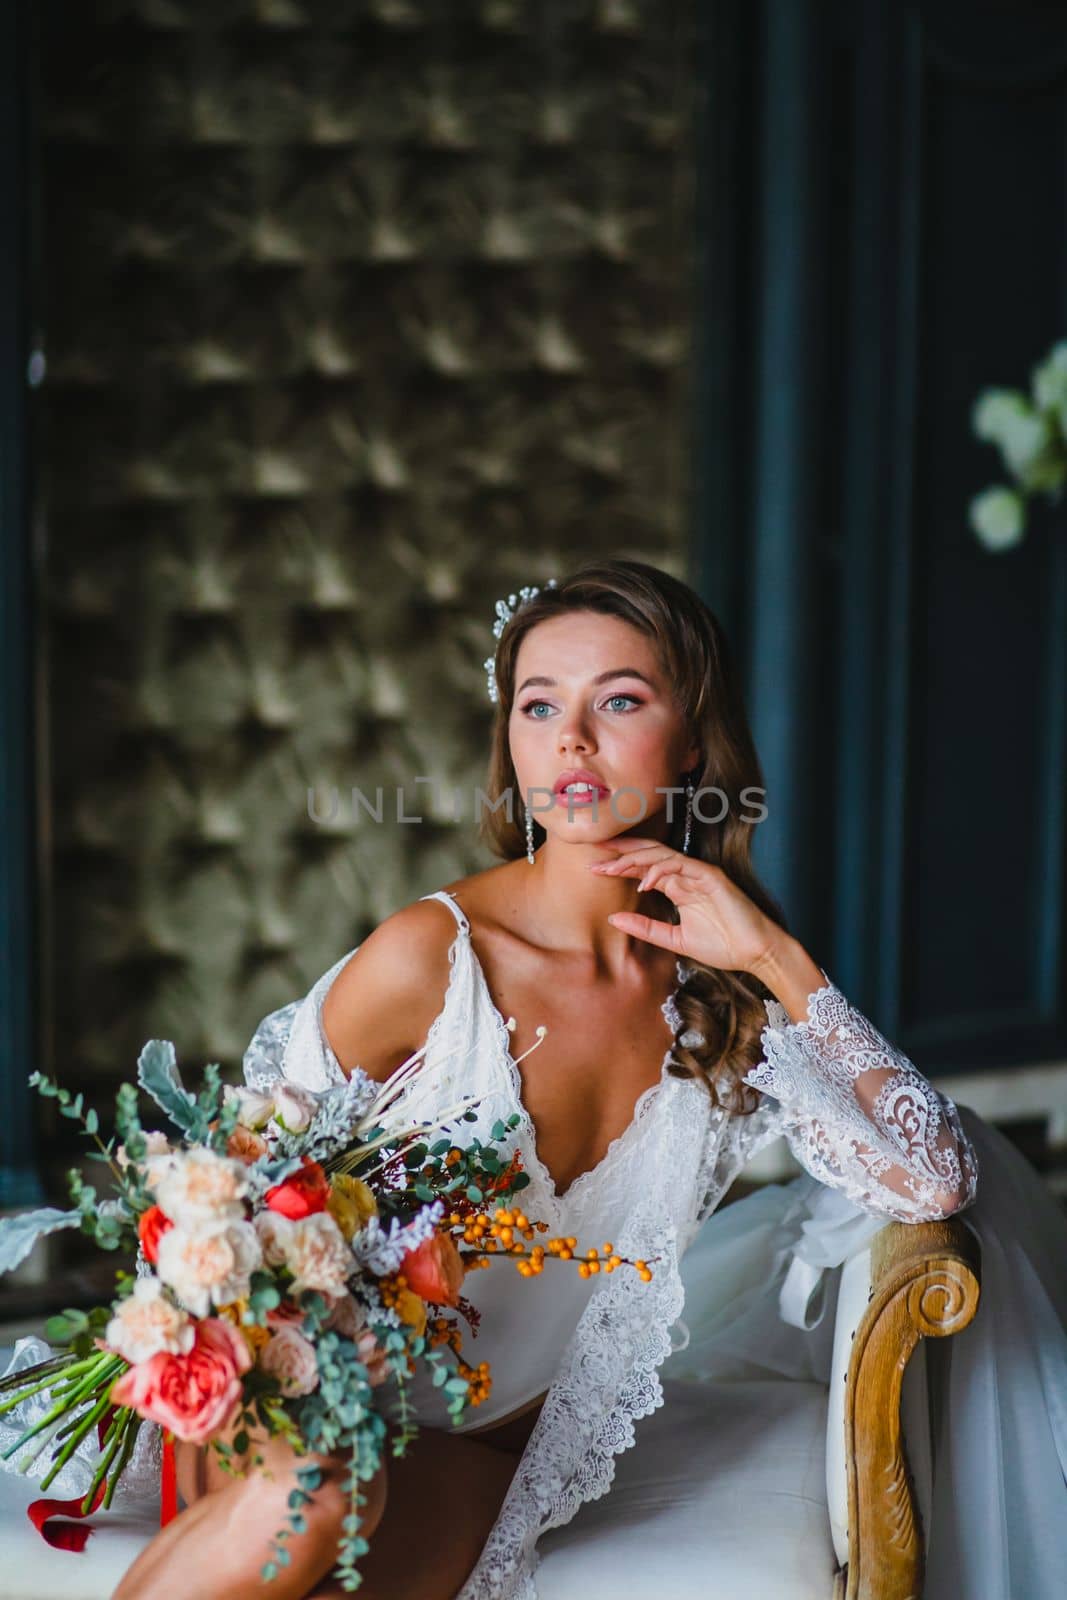 Close-up portrait of young bride in white negligee and lingerie posing with gorgeous bridal bouquet in the hotel room